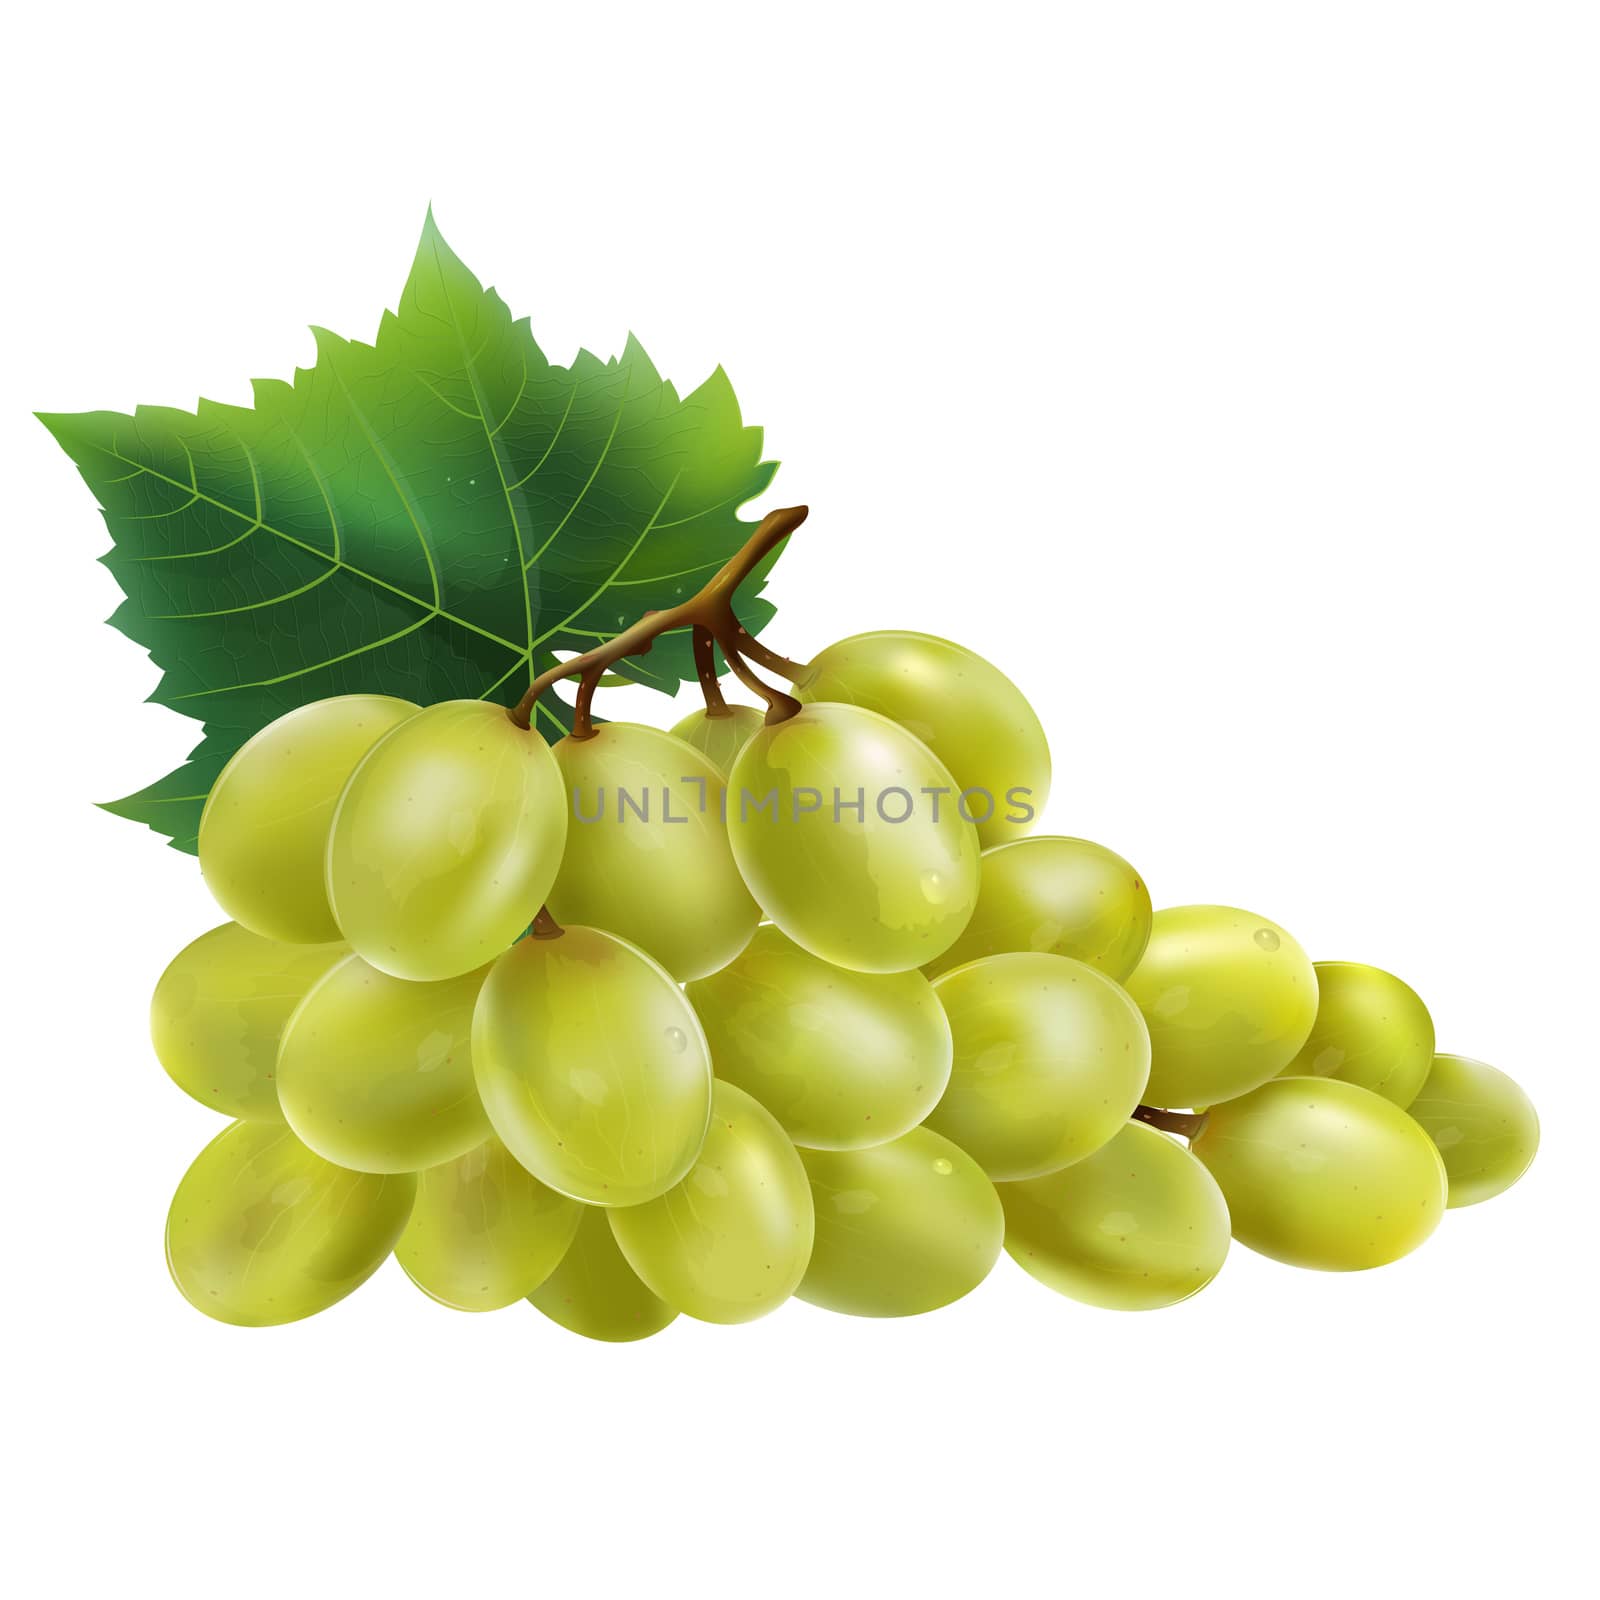 White grapes on white background by ConceptCafe